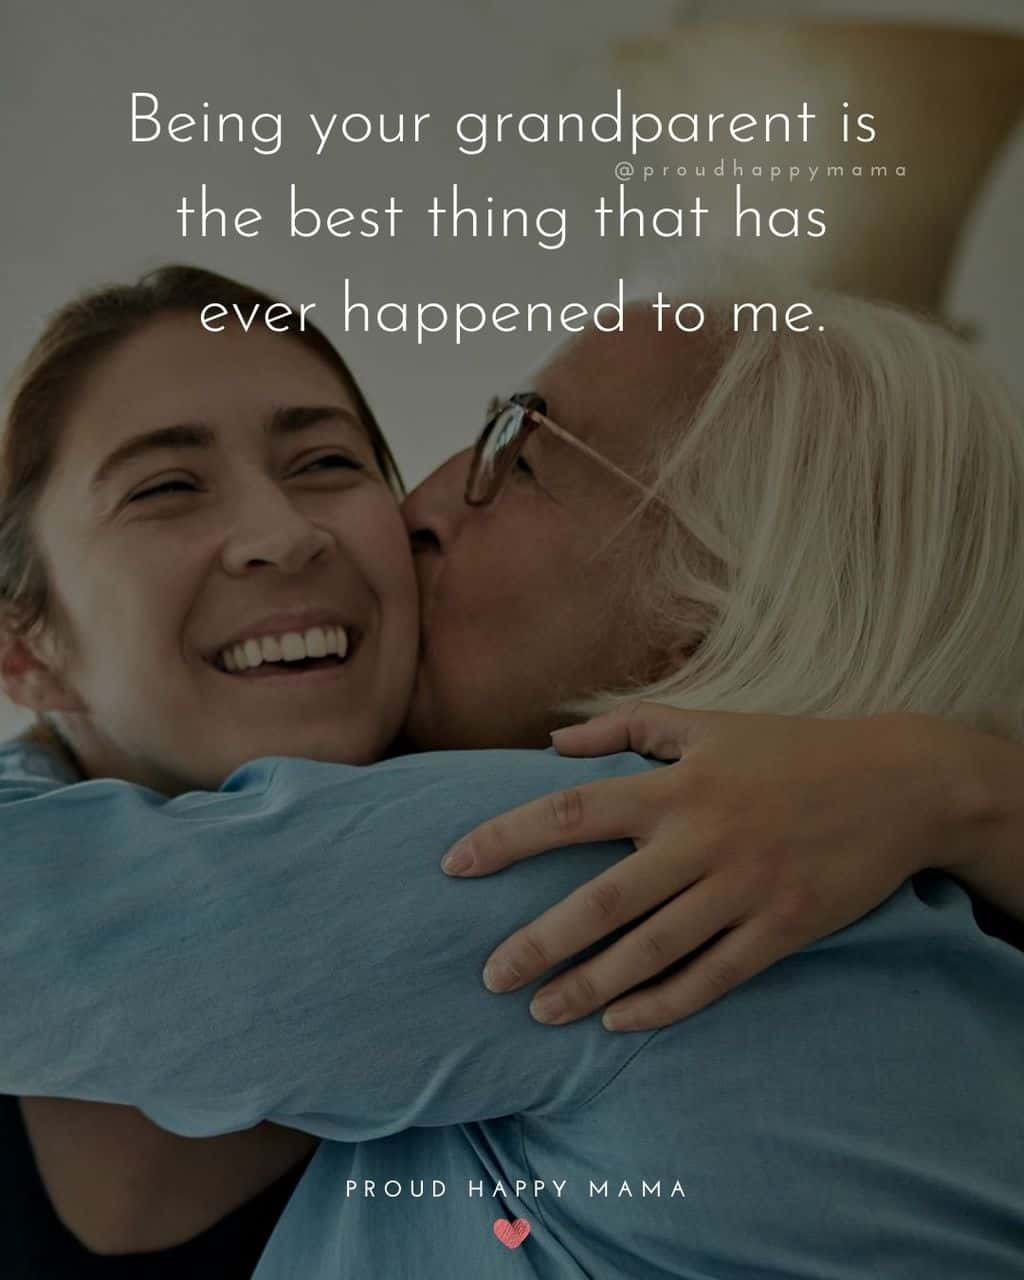 Grandparent Quotes – Being your grandparent is the best thing that has ever happened to me.’